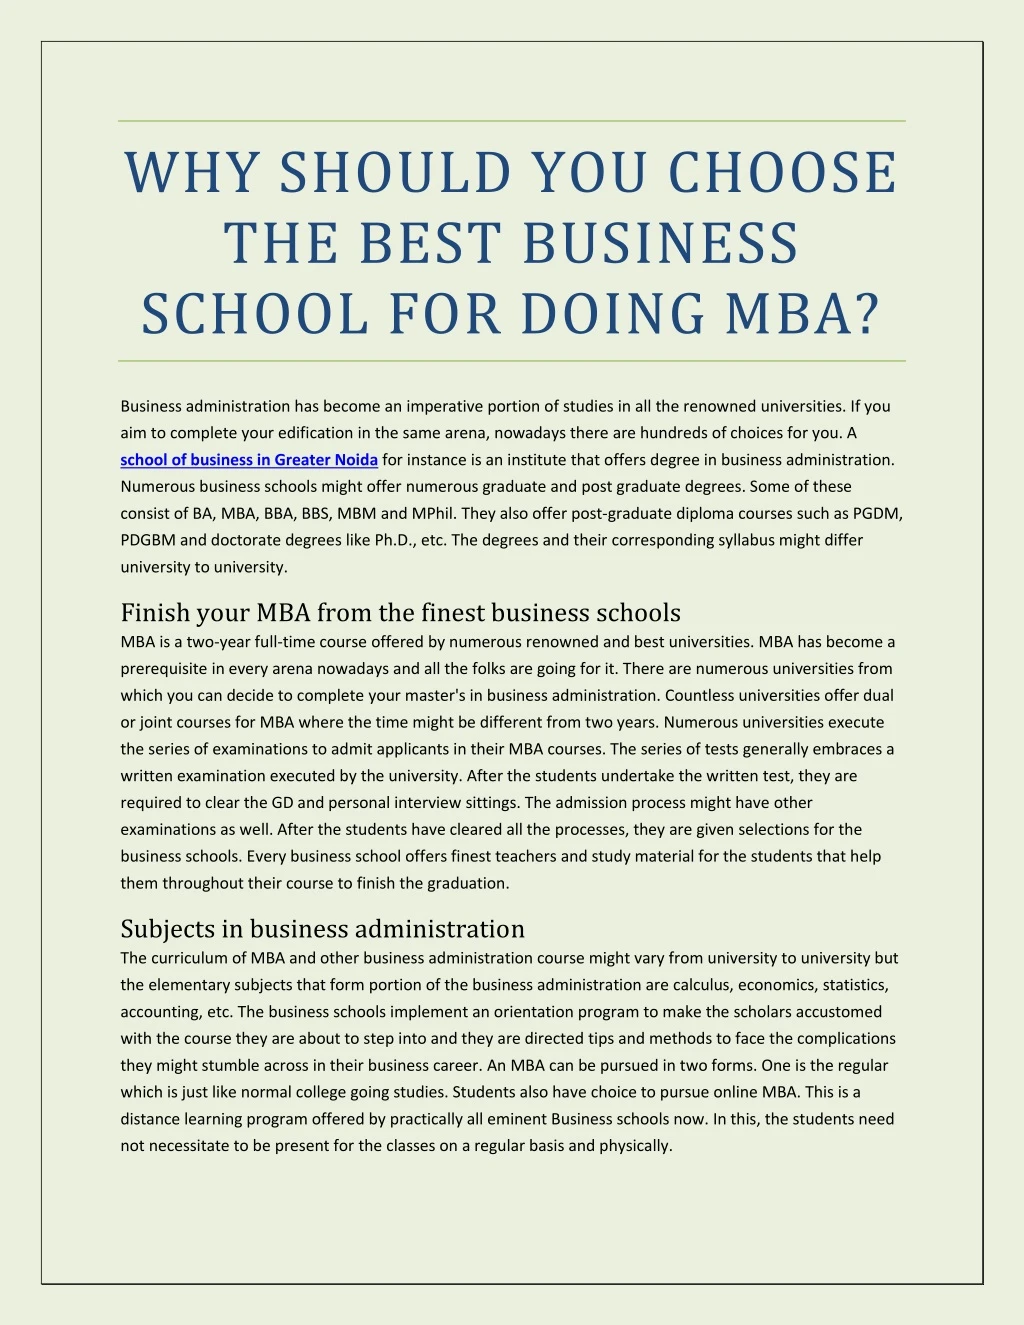 why should you choose the best business school